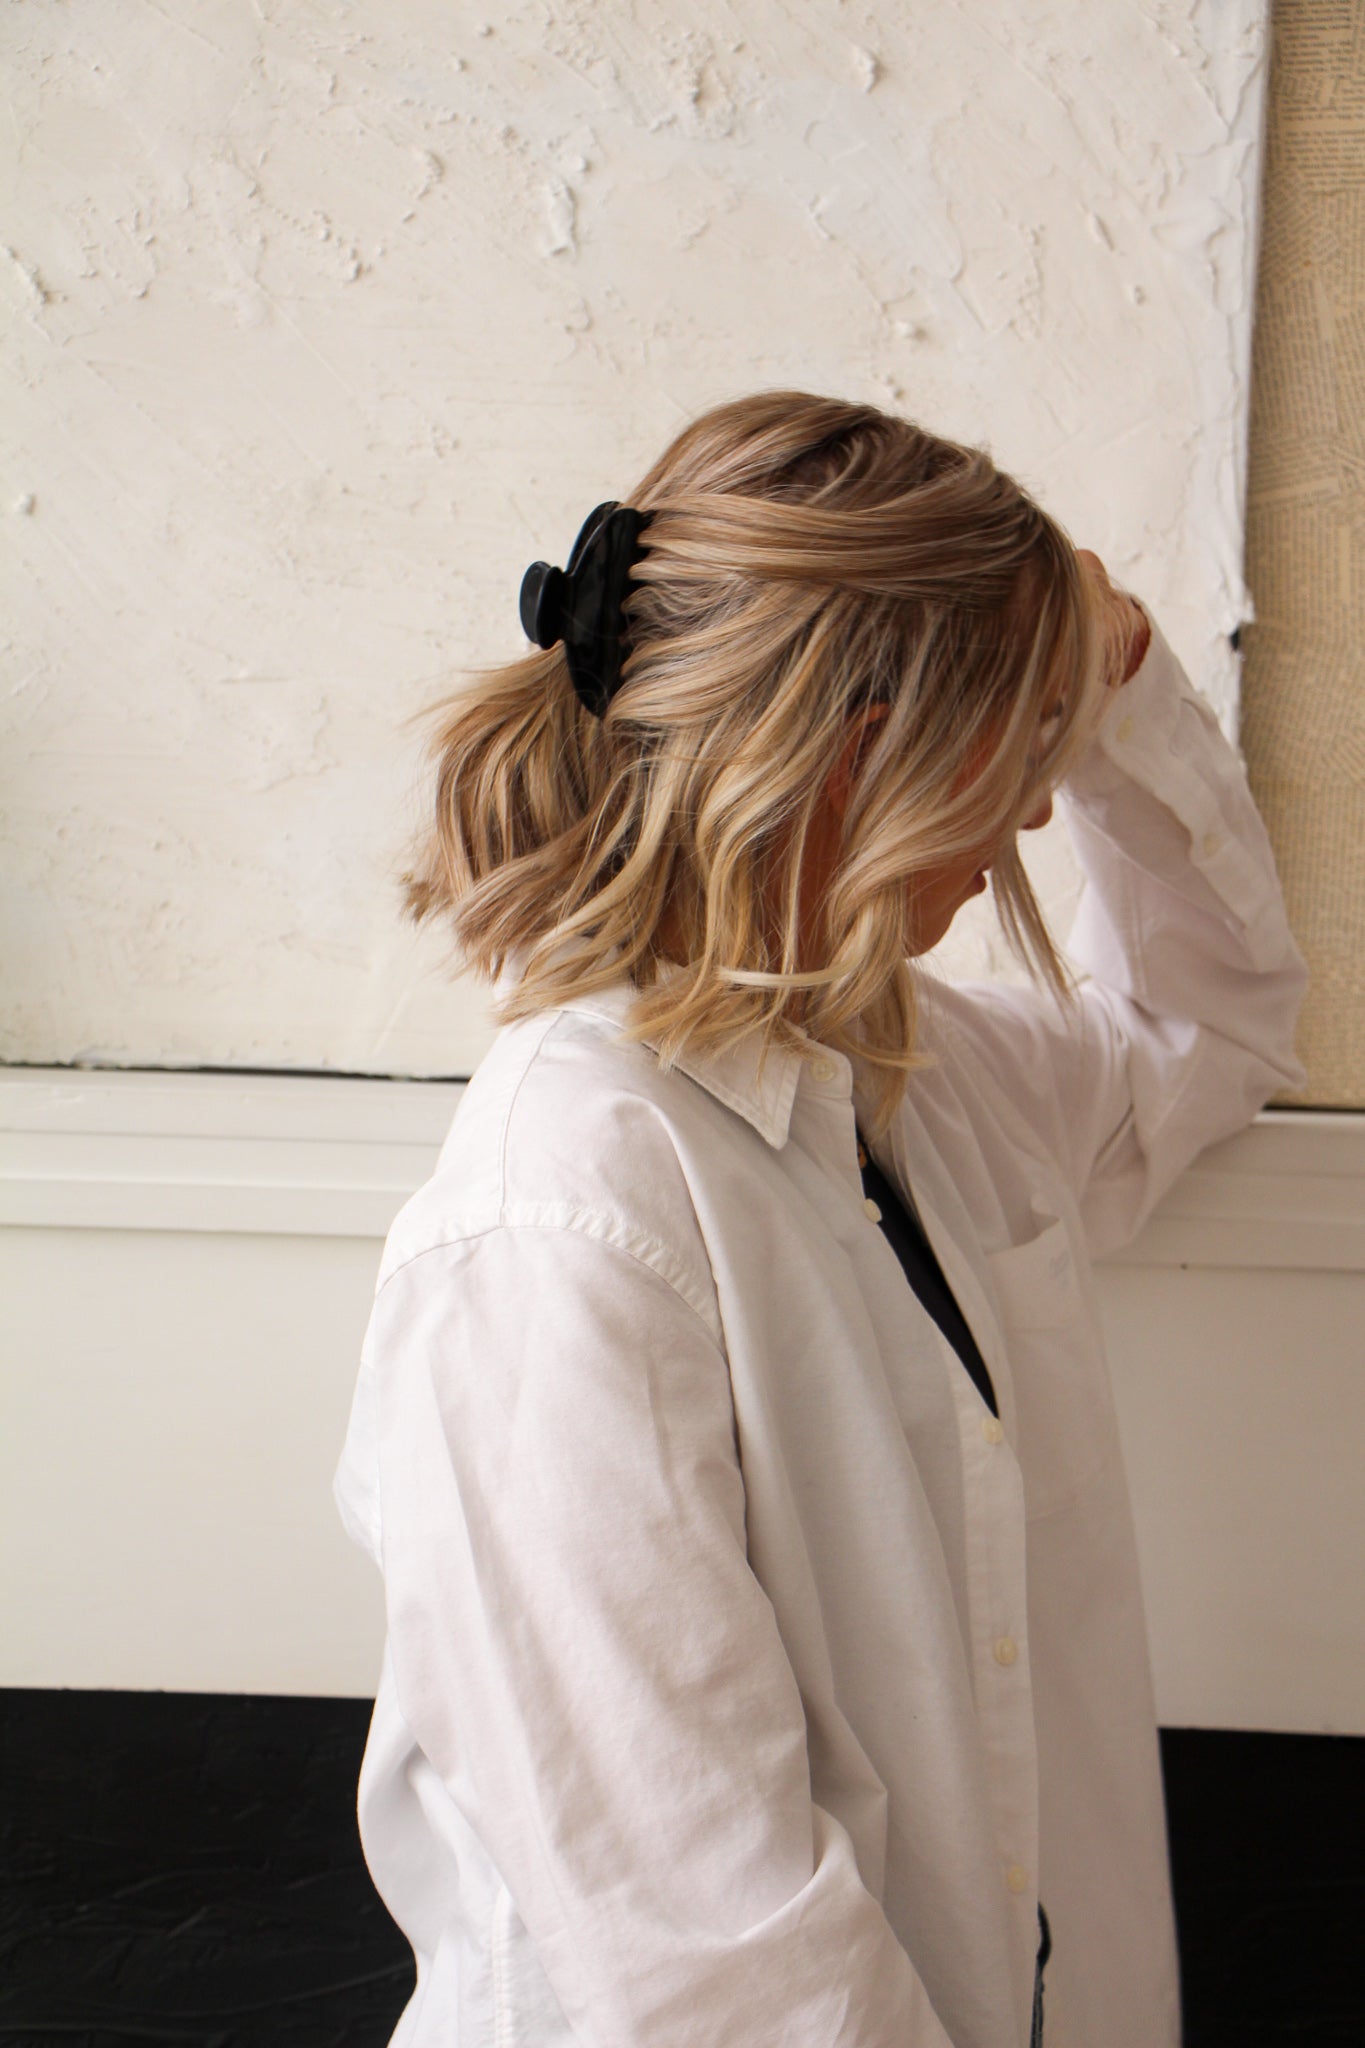 Black Claw Clip in model's half up hair style. Model is wearing a white dress shirt and leaning against a white fireplace. 